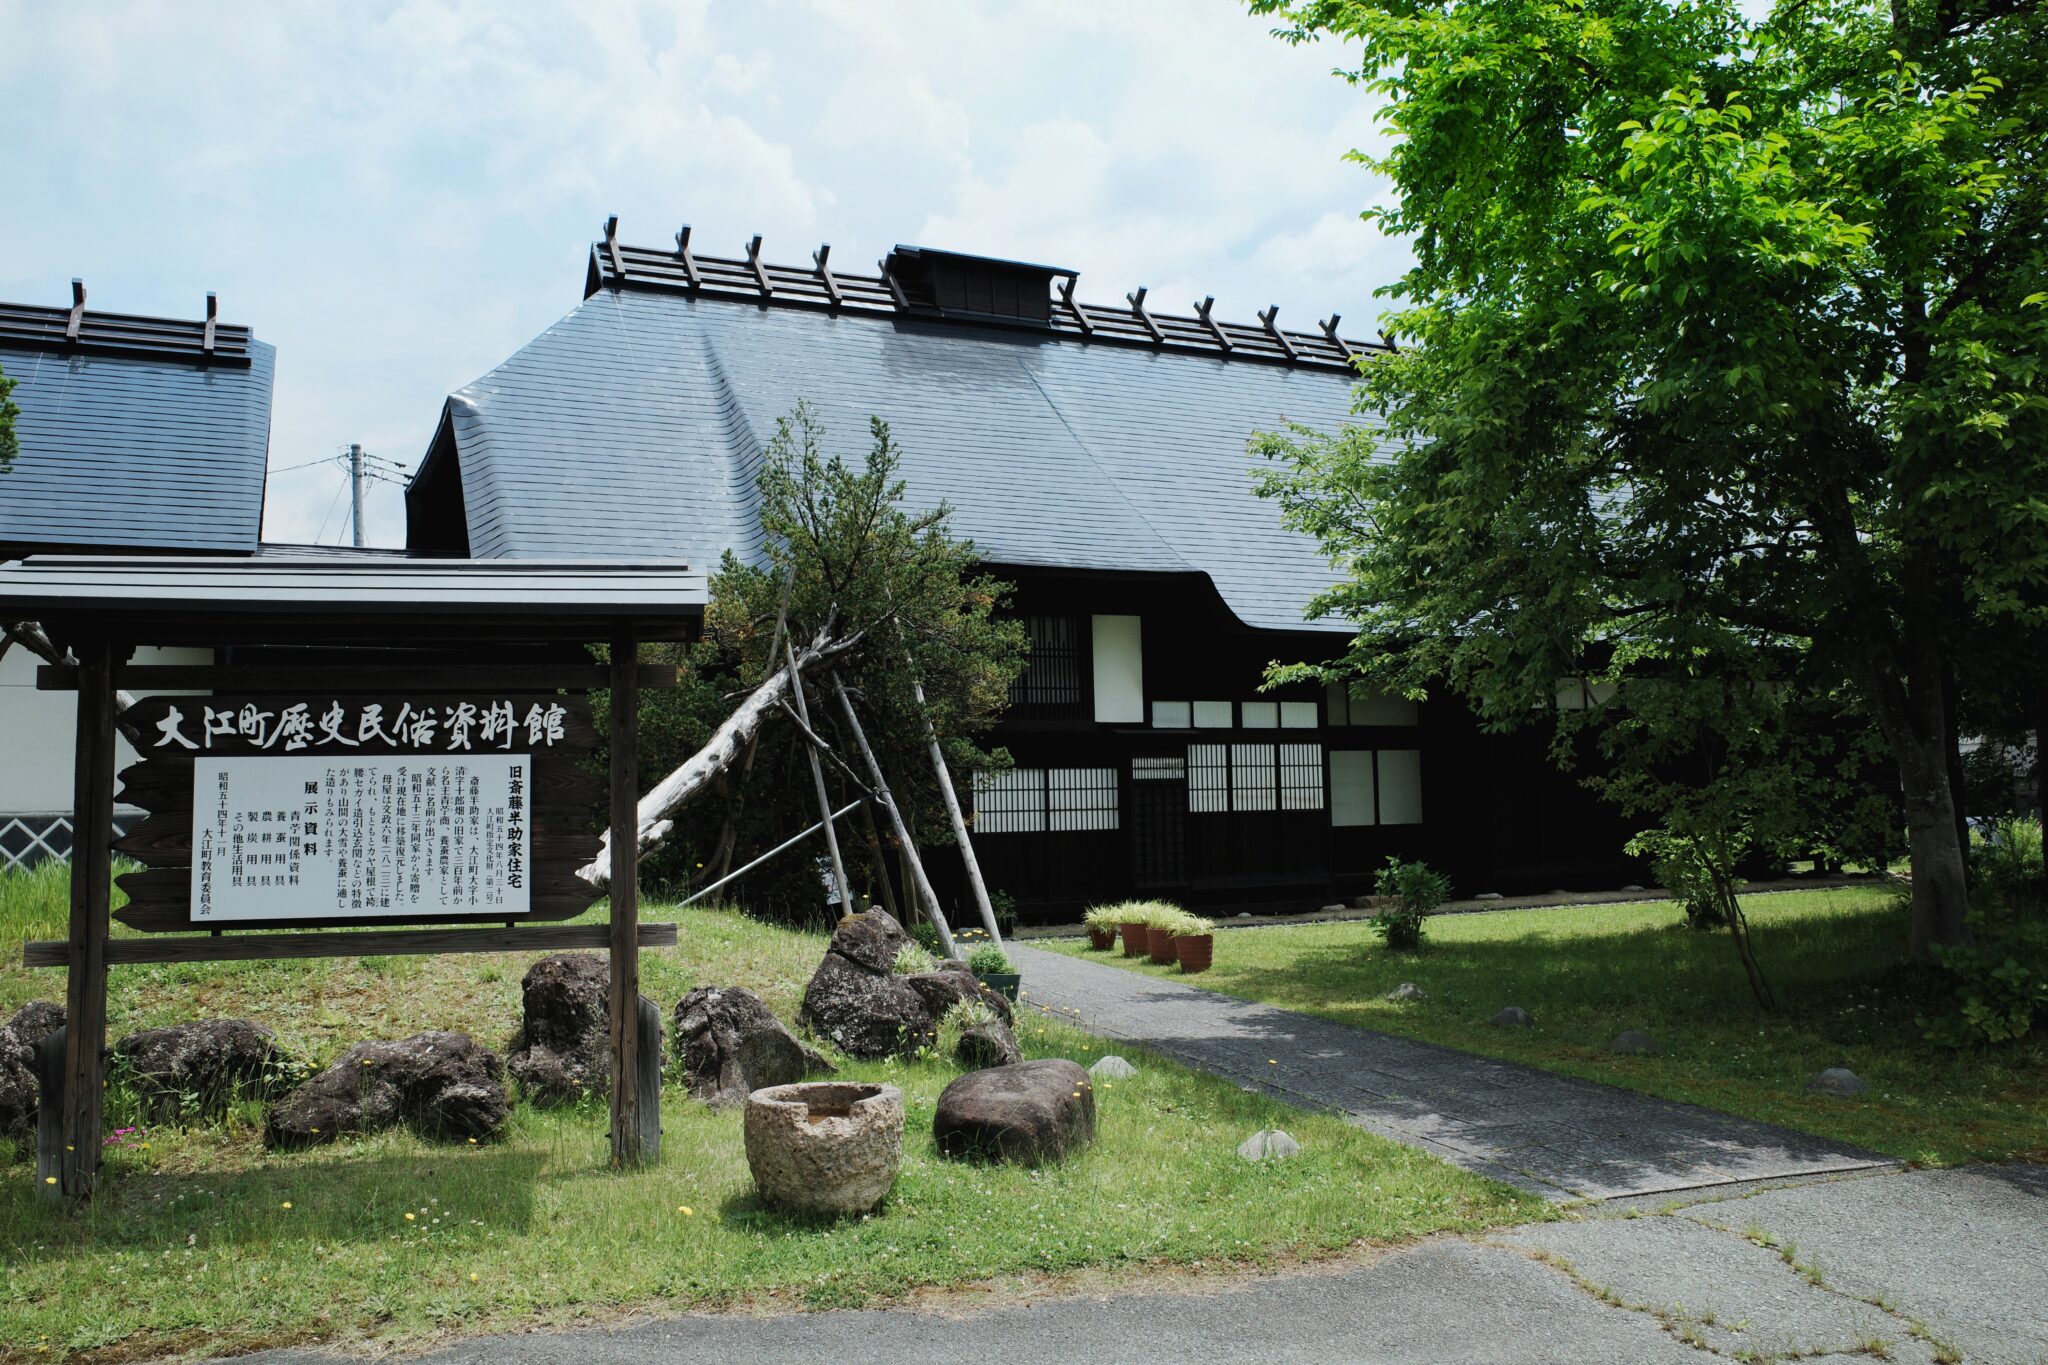 Oe Town History and Folklore Museum